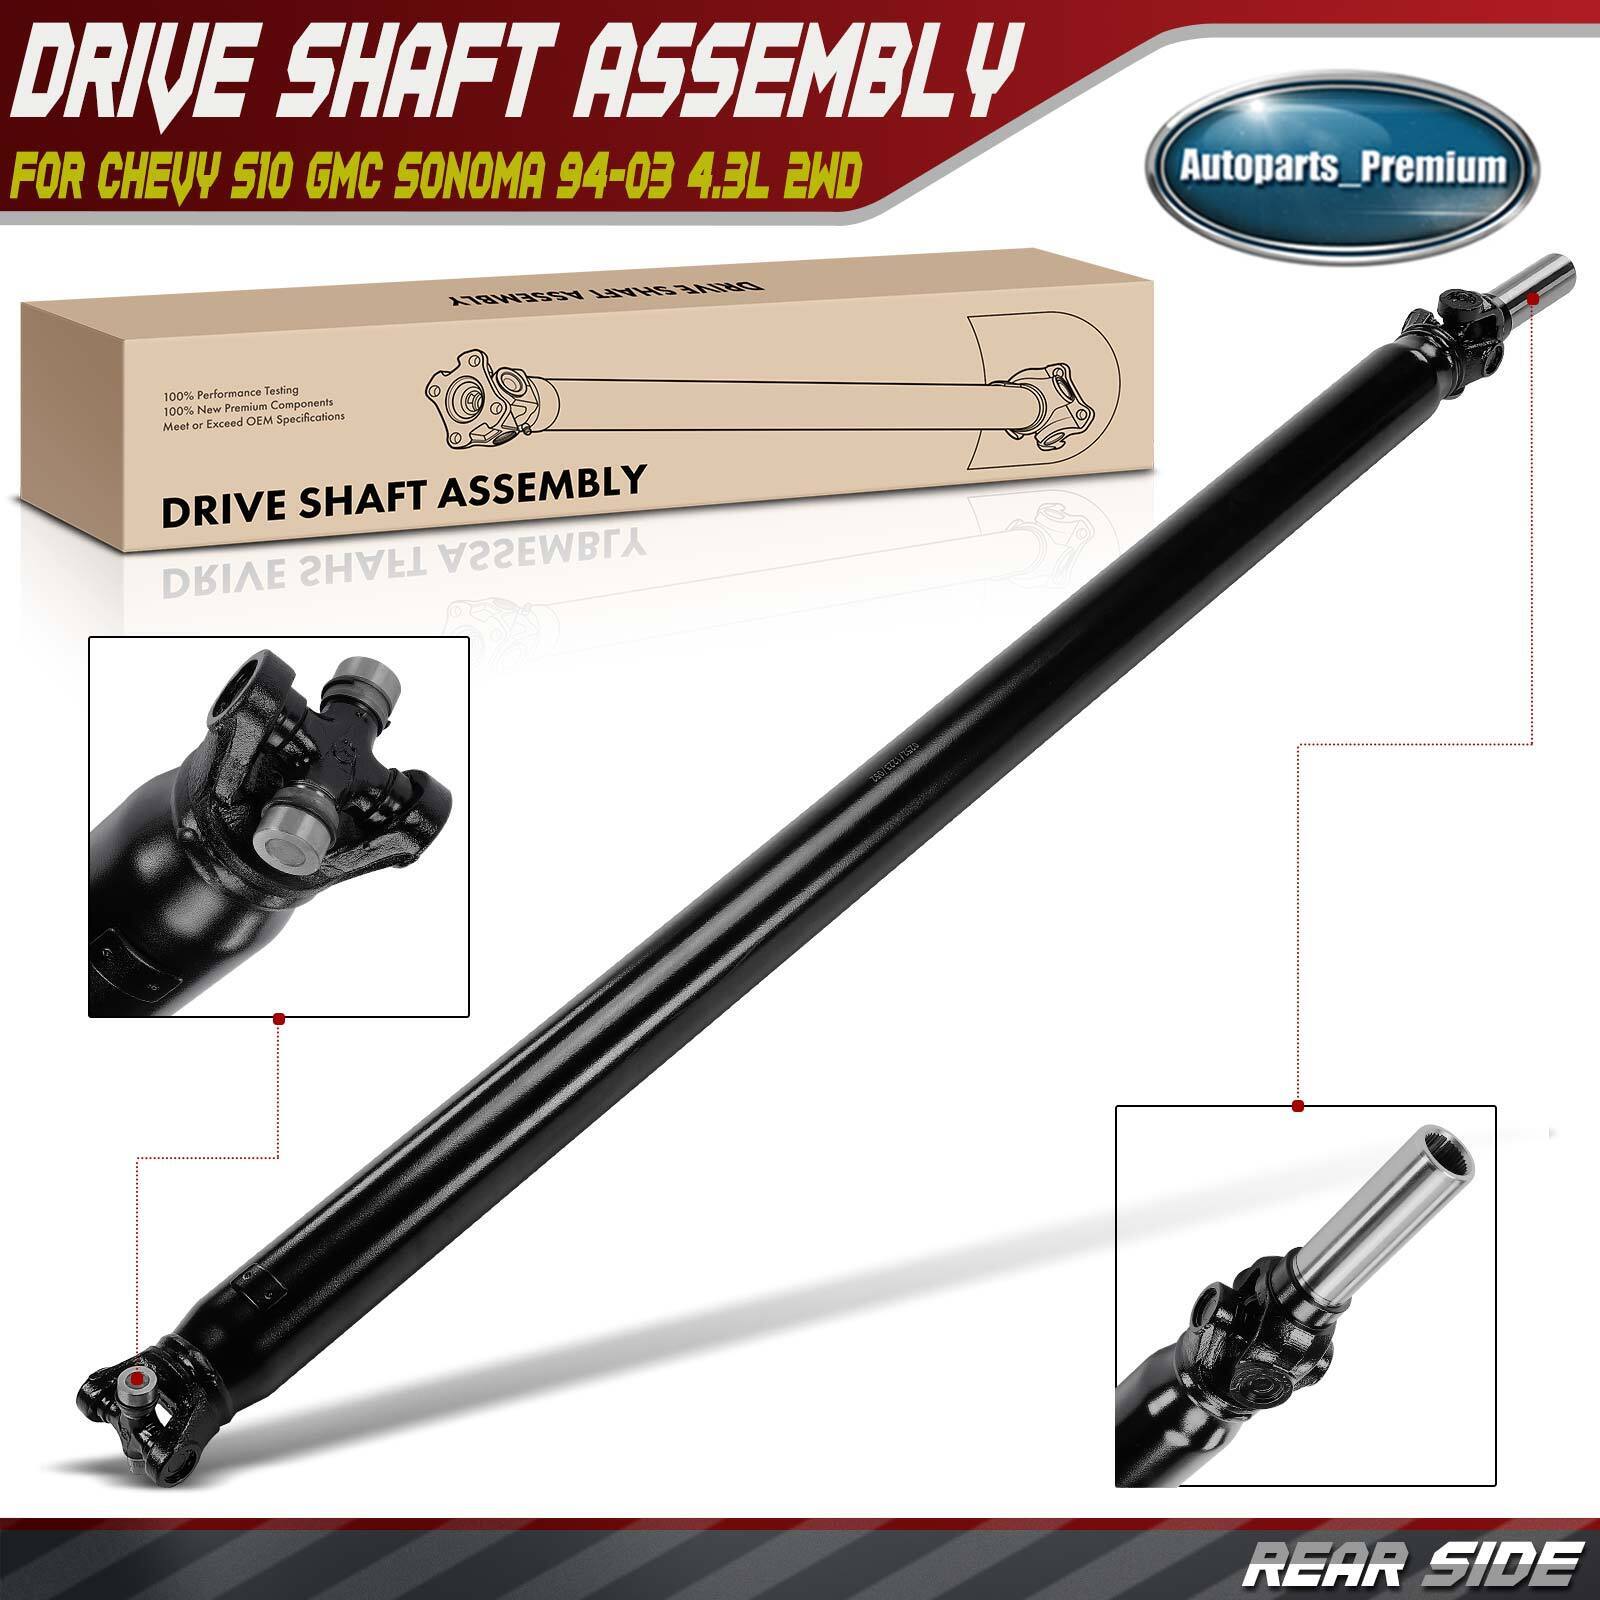 Rear Drivershaft Prop Shaft Assy for Chevy S10 S15 GMC Sonoma 1994-2003 4.3L 2WD